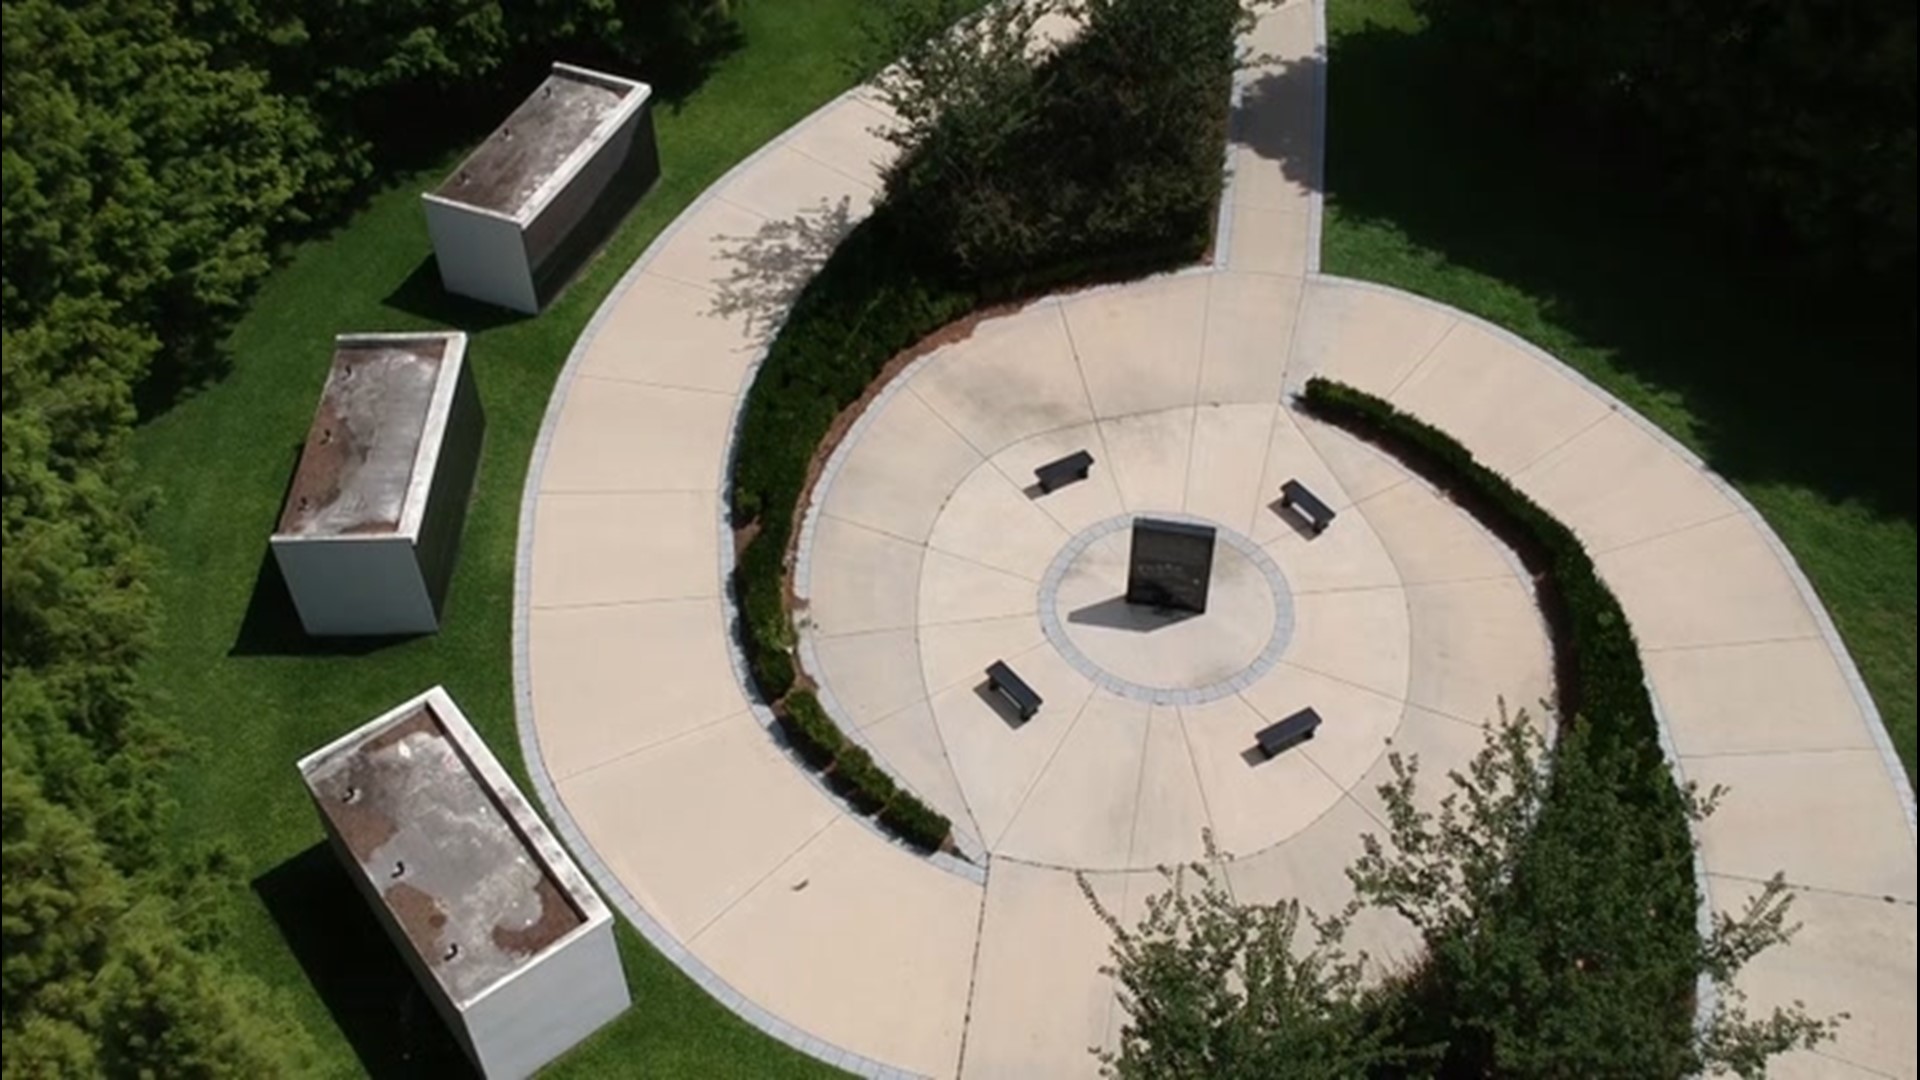 Aug. 29 marked the 15th anniversary of Hurricane Katrina. In New Orleans, Louisiana, there's a Katrina Memorial which appears shaped like a cyclone from above.